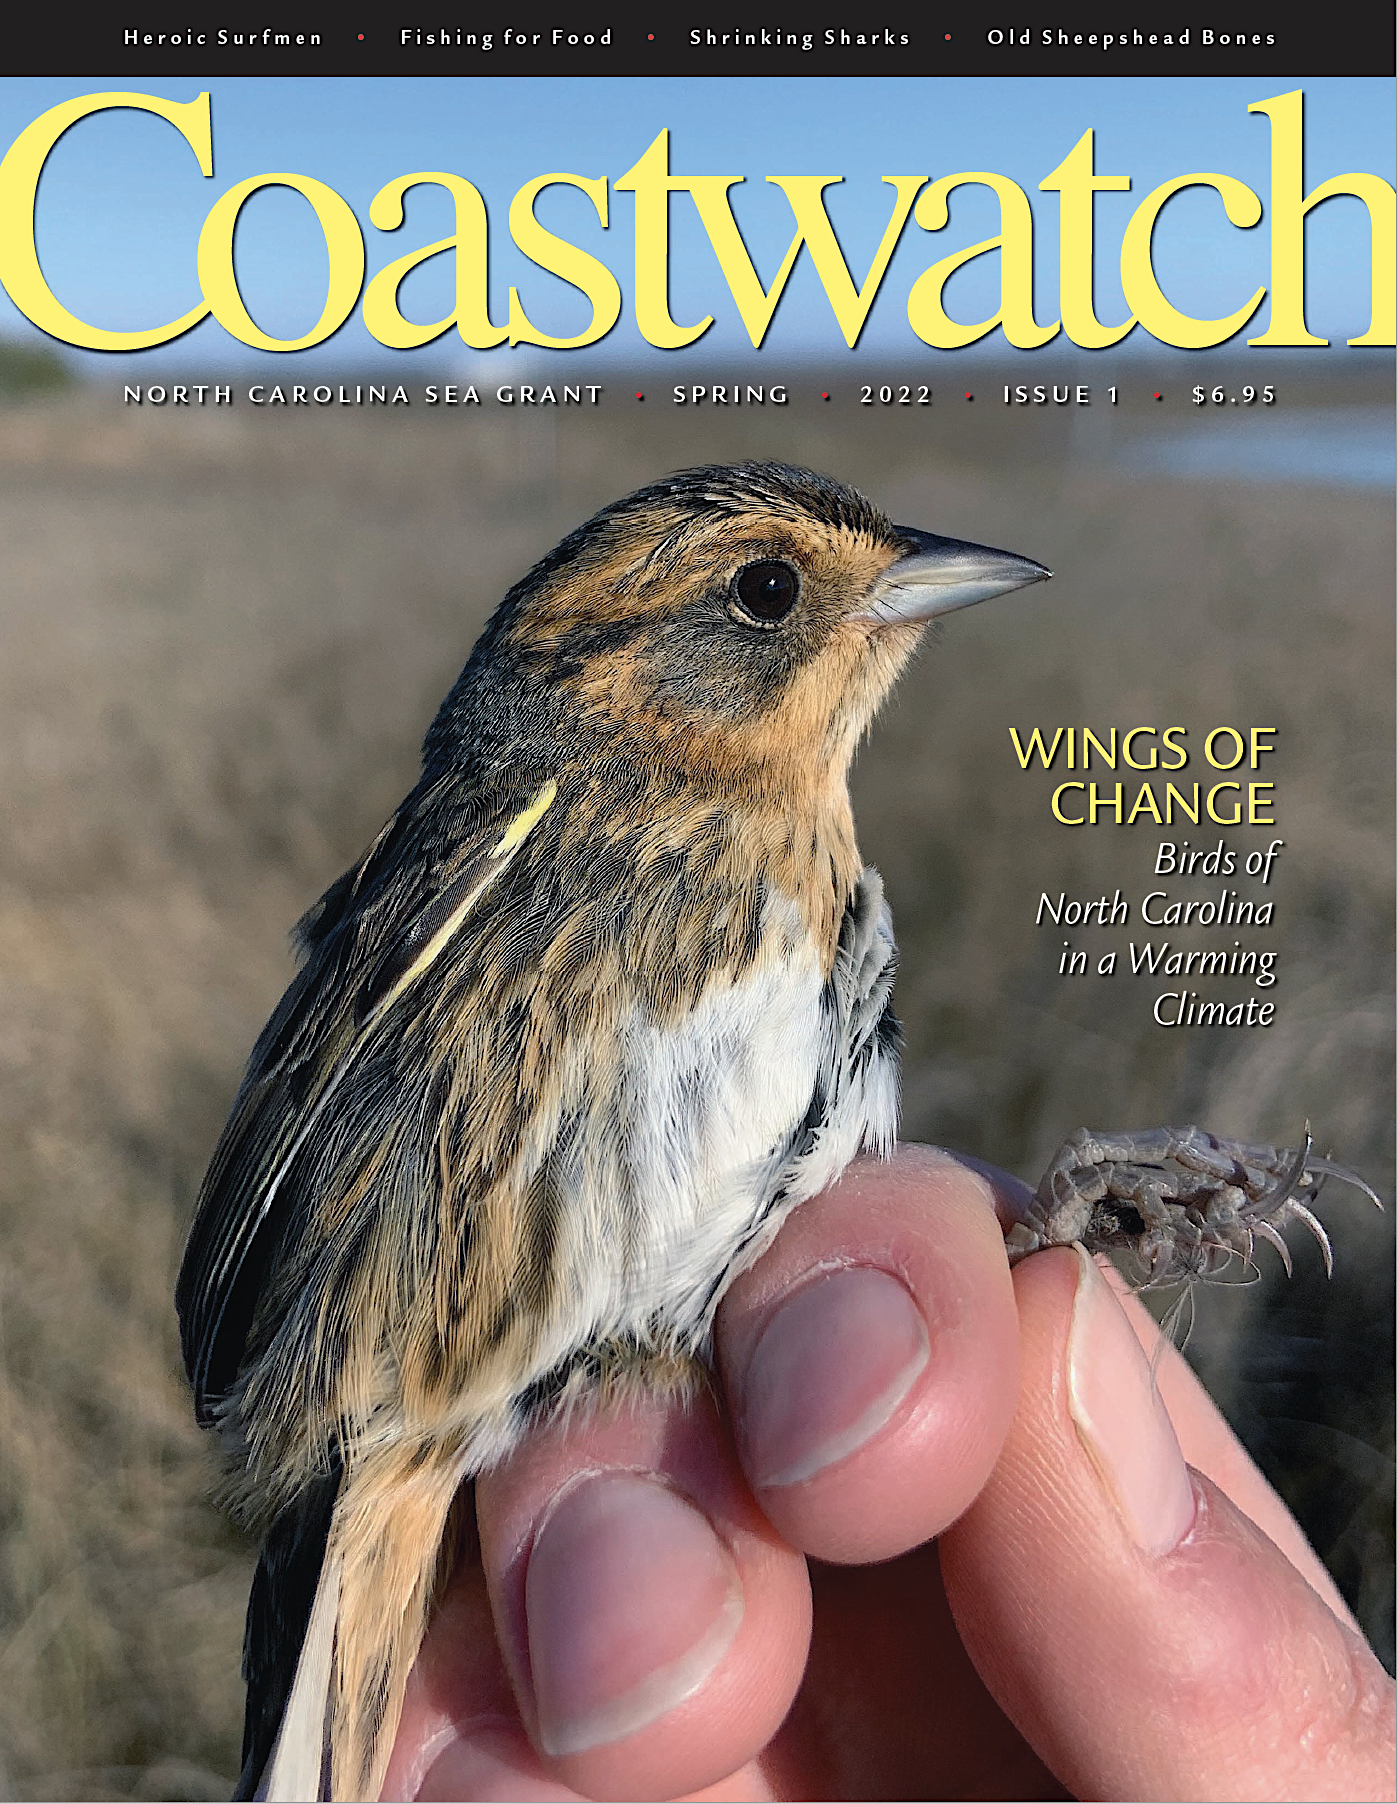 image: Coastwatch Spring 2022 cover.